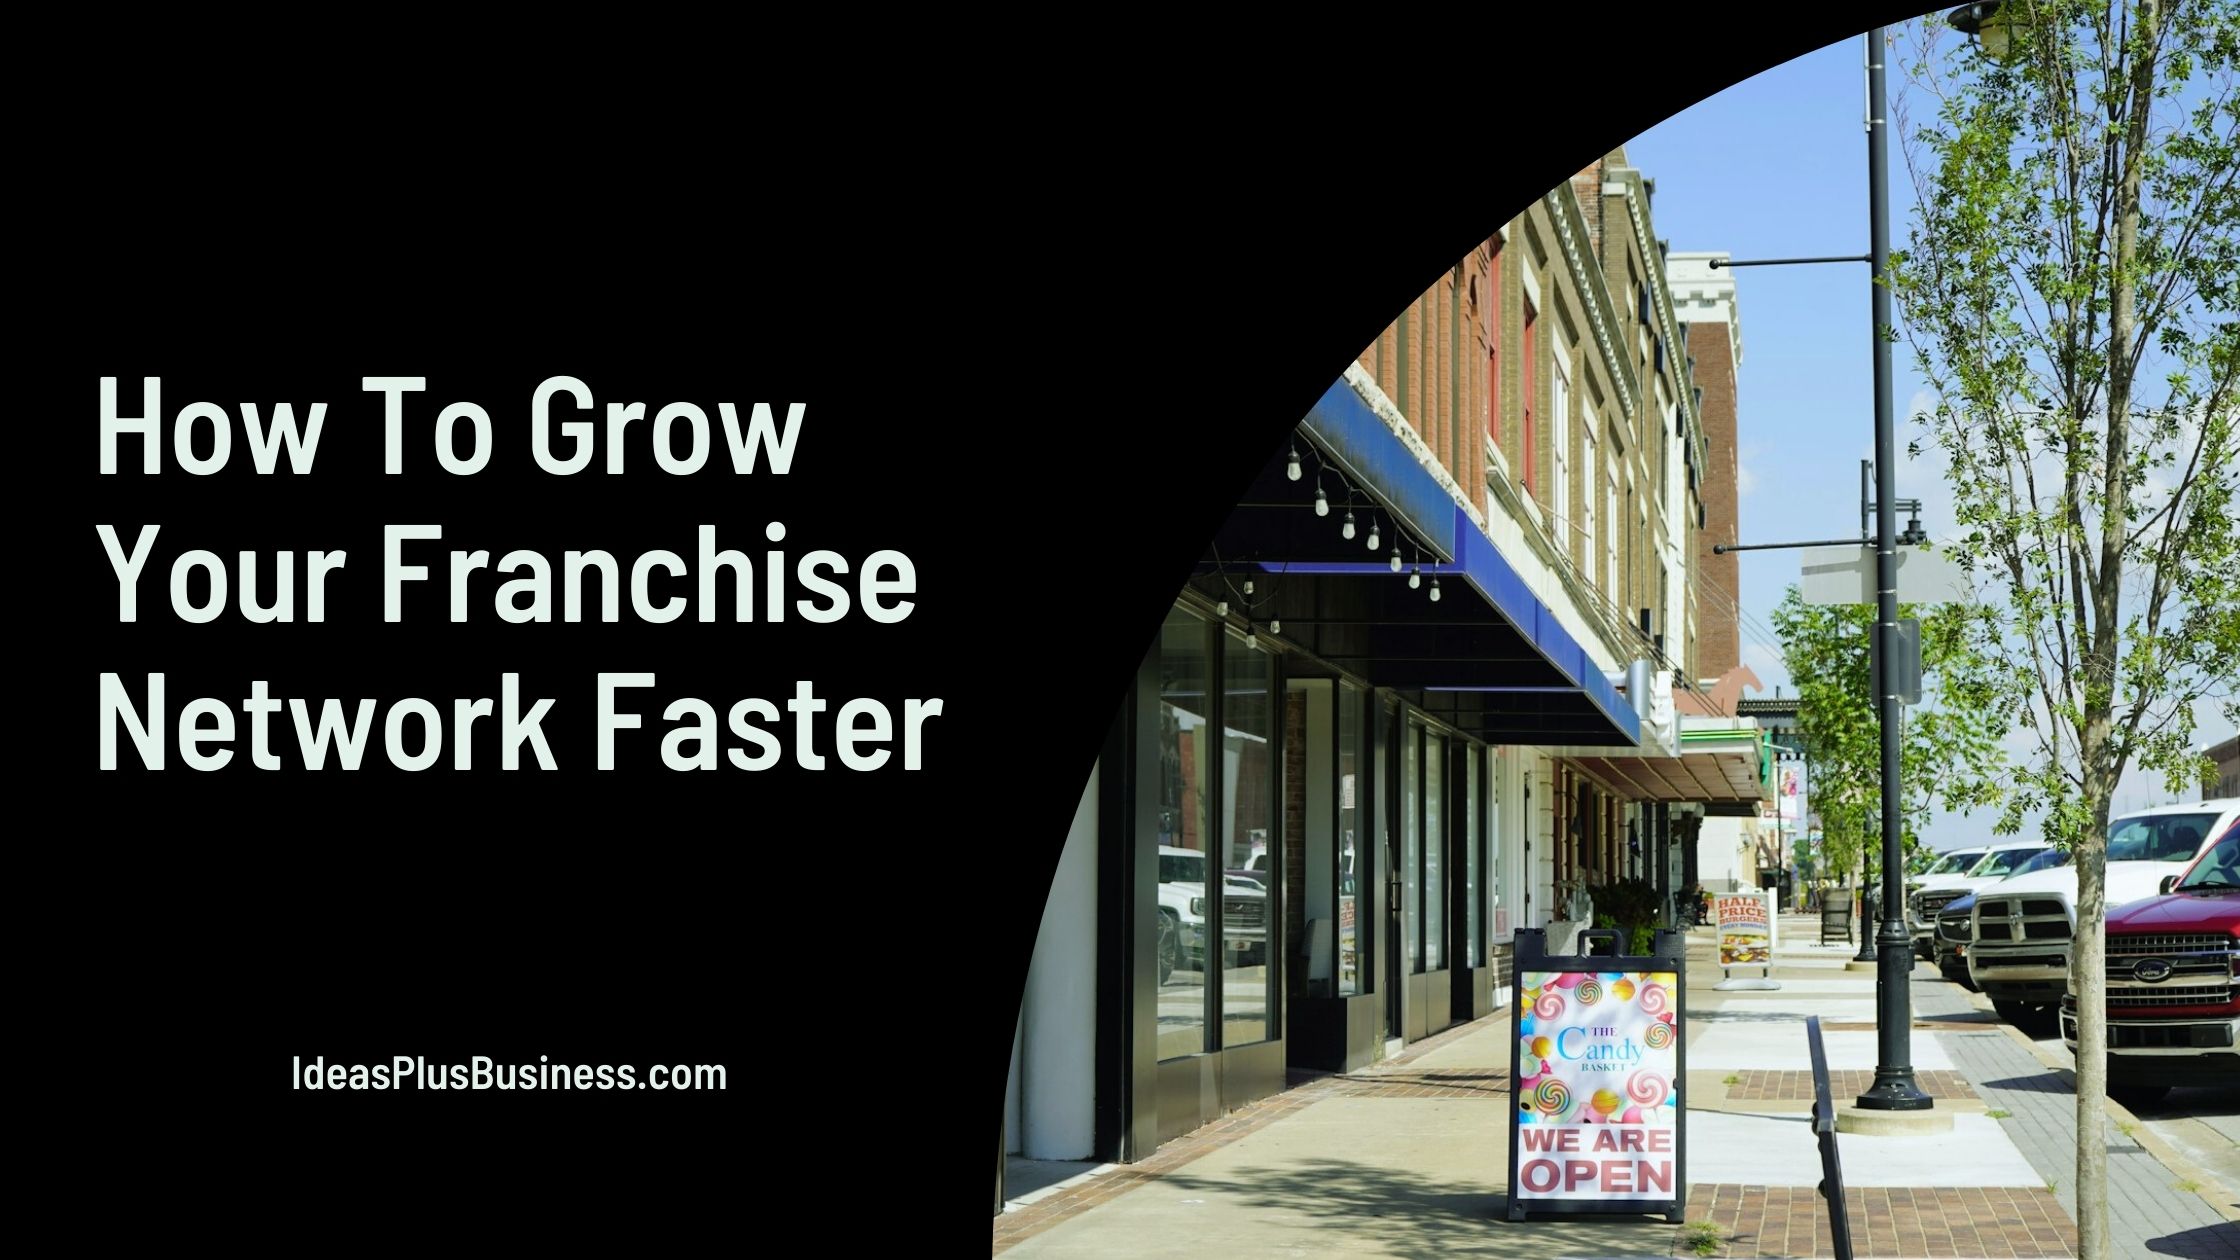 How To Grow Your Franchise Network Faster (6 Powerful Tips!)